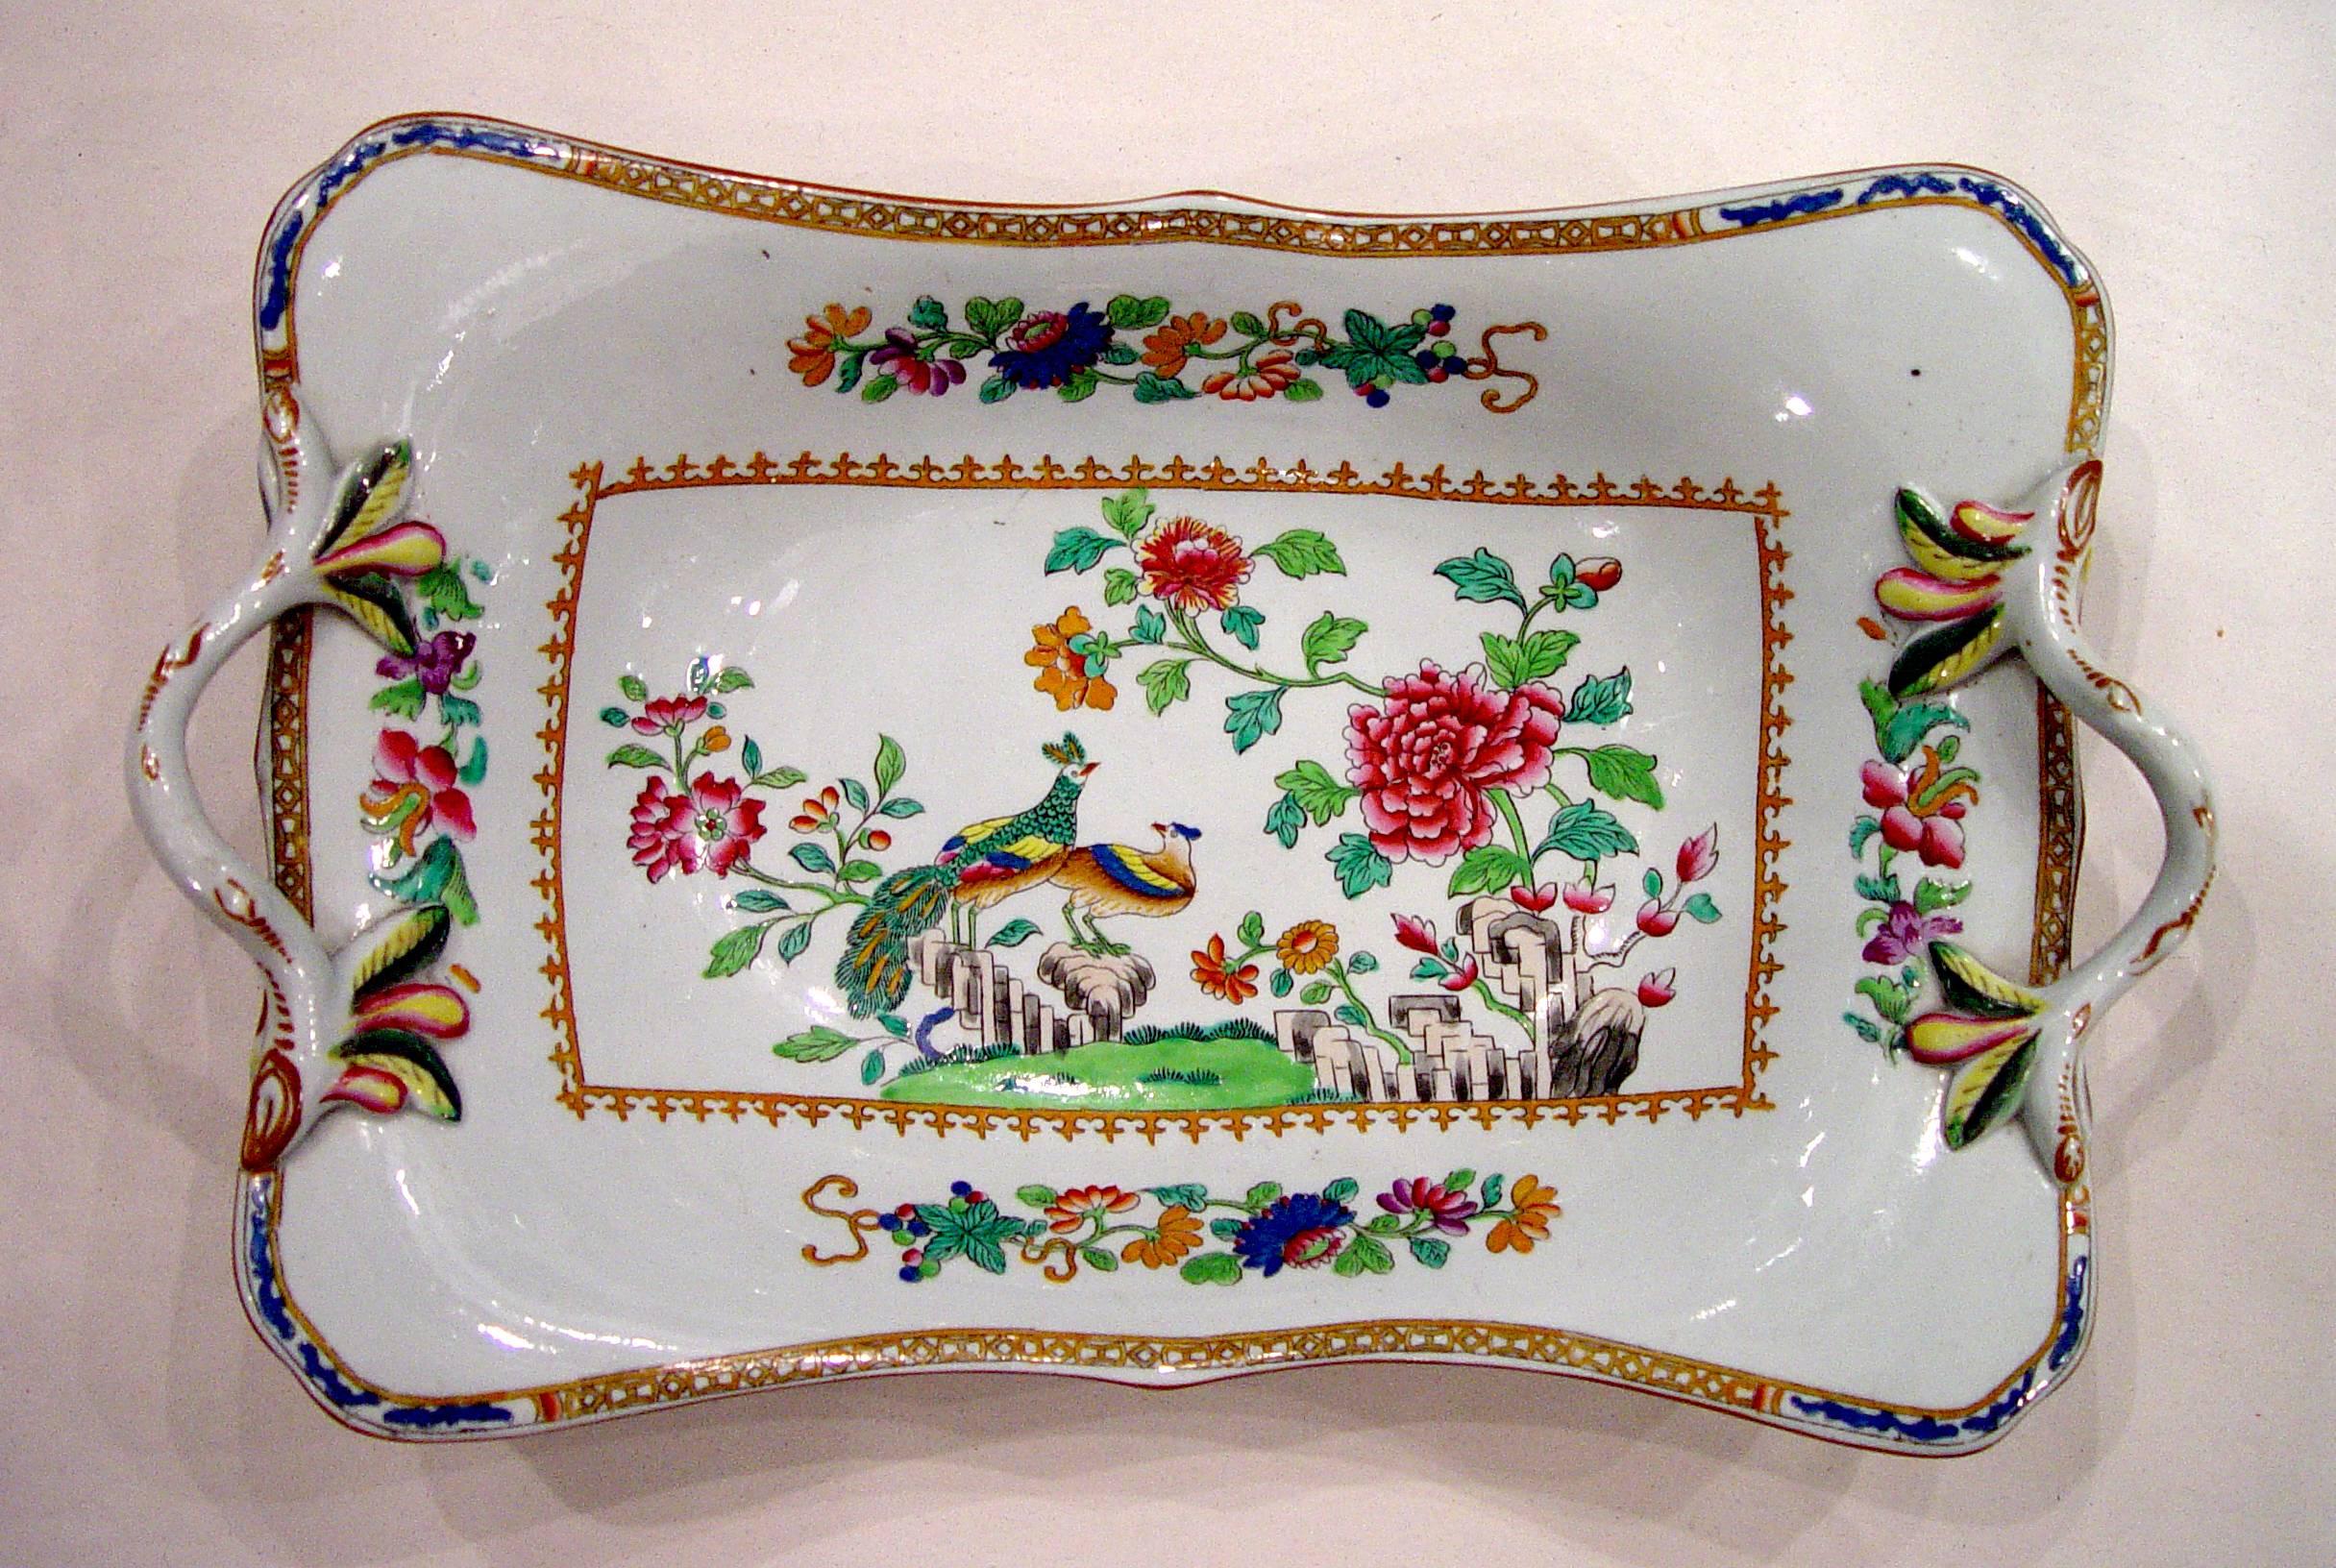 The Spode Stone China double-handled footed baskets in pattern 2118 are decorated with a pattern known as the Double Peacock pattern, a pattern found on Chinese Export in the 1760s and 1970s.

The Spode Museum states that 